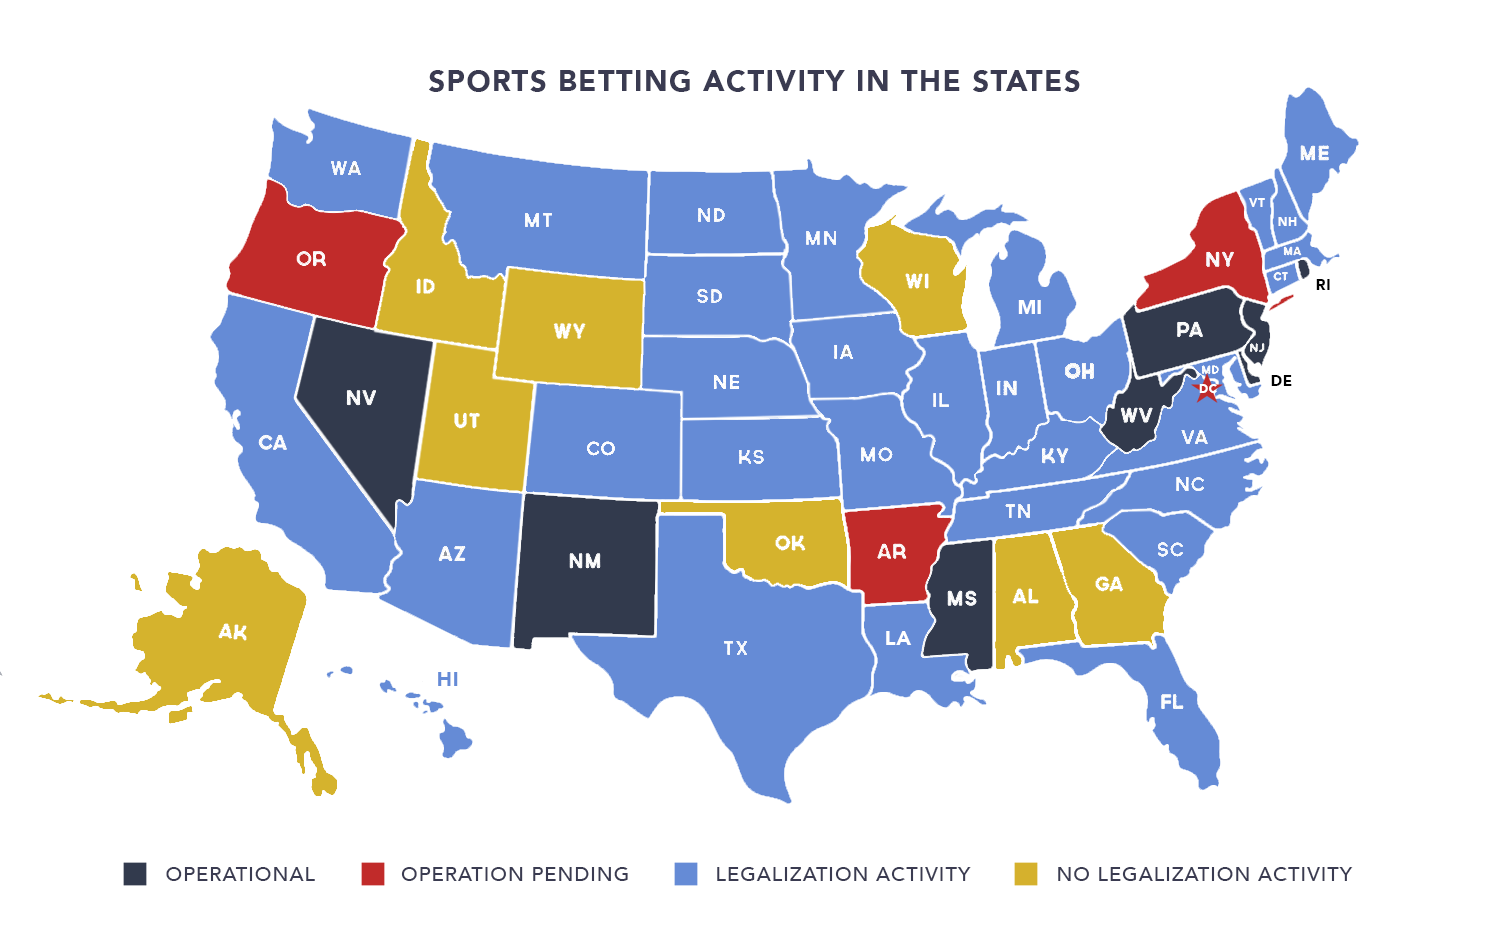 legalized online gambling states